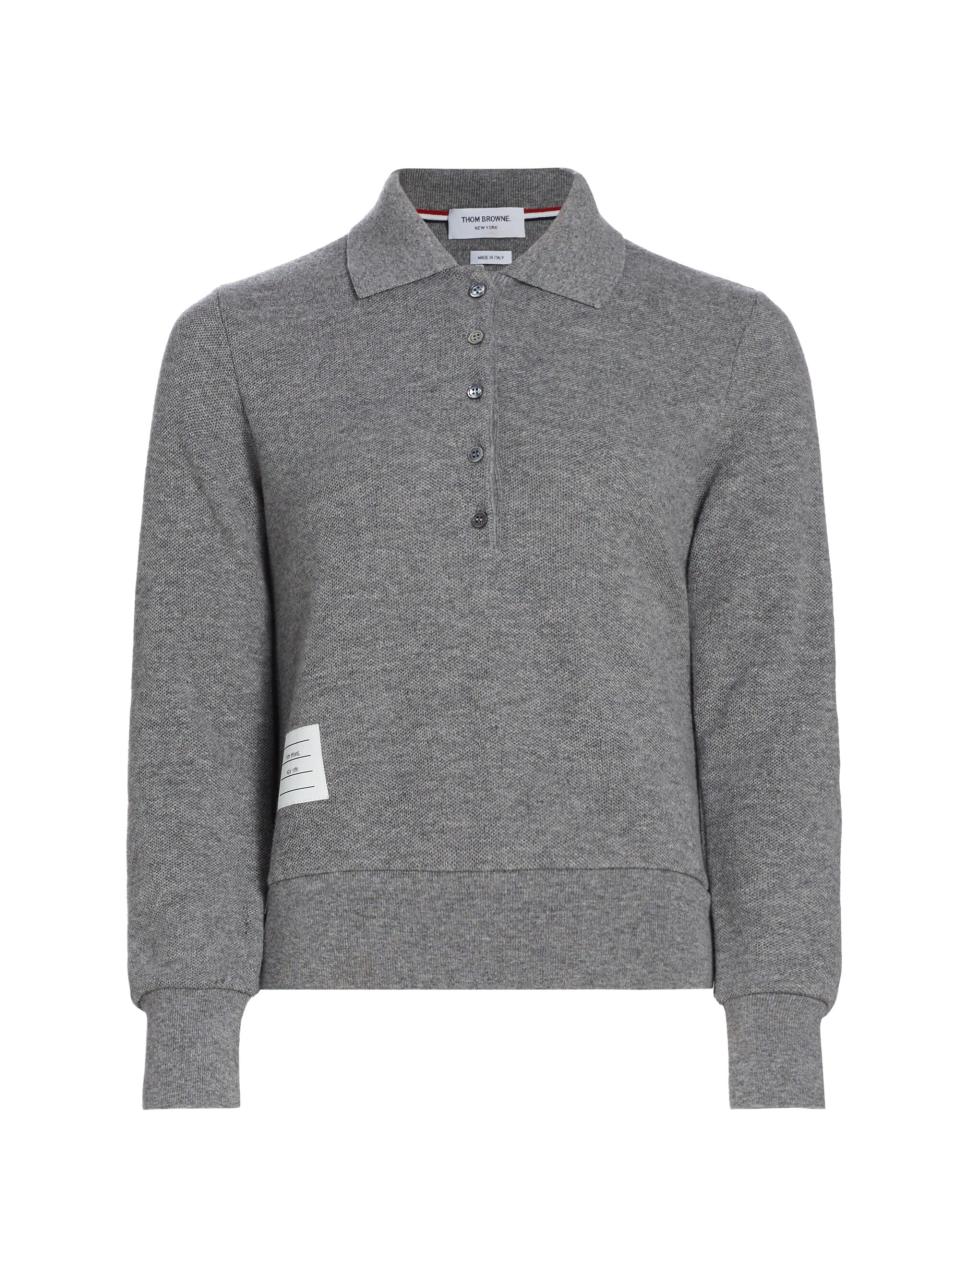 Saks and Thom Browne Long Sleeve Polo